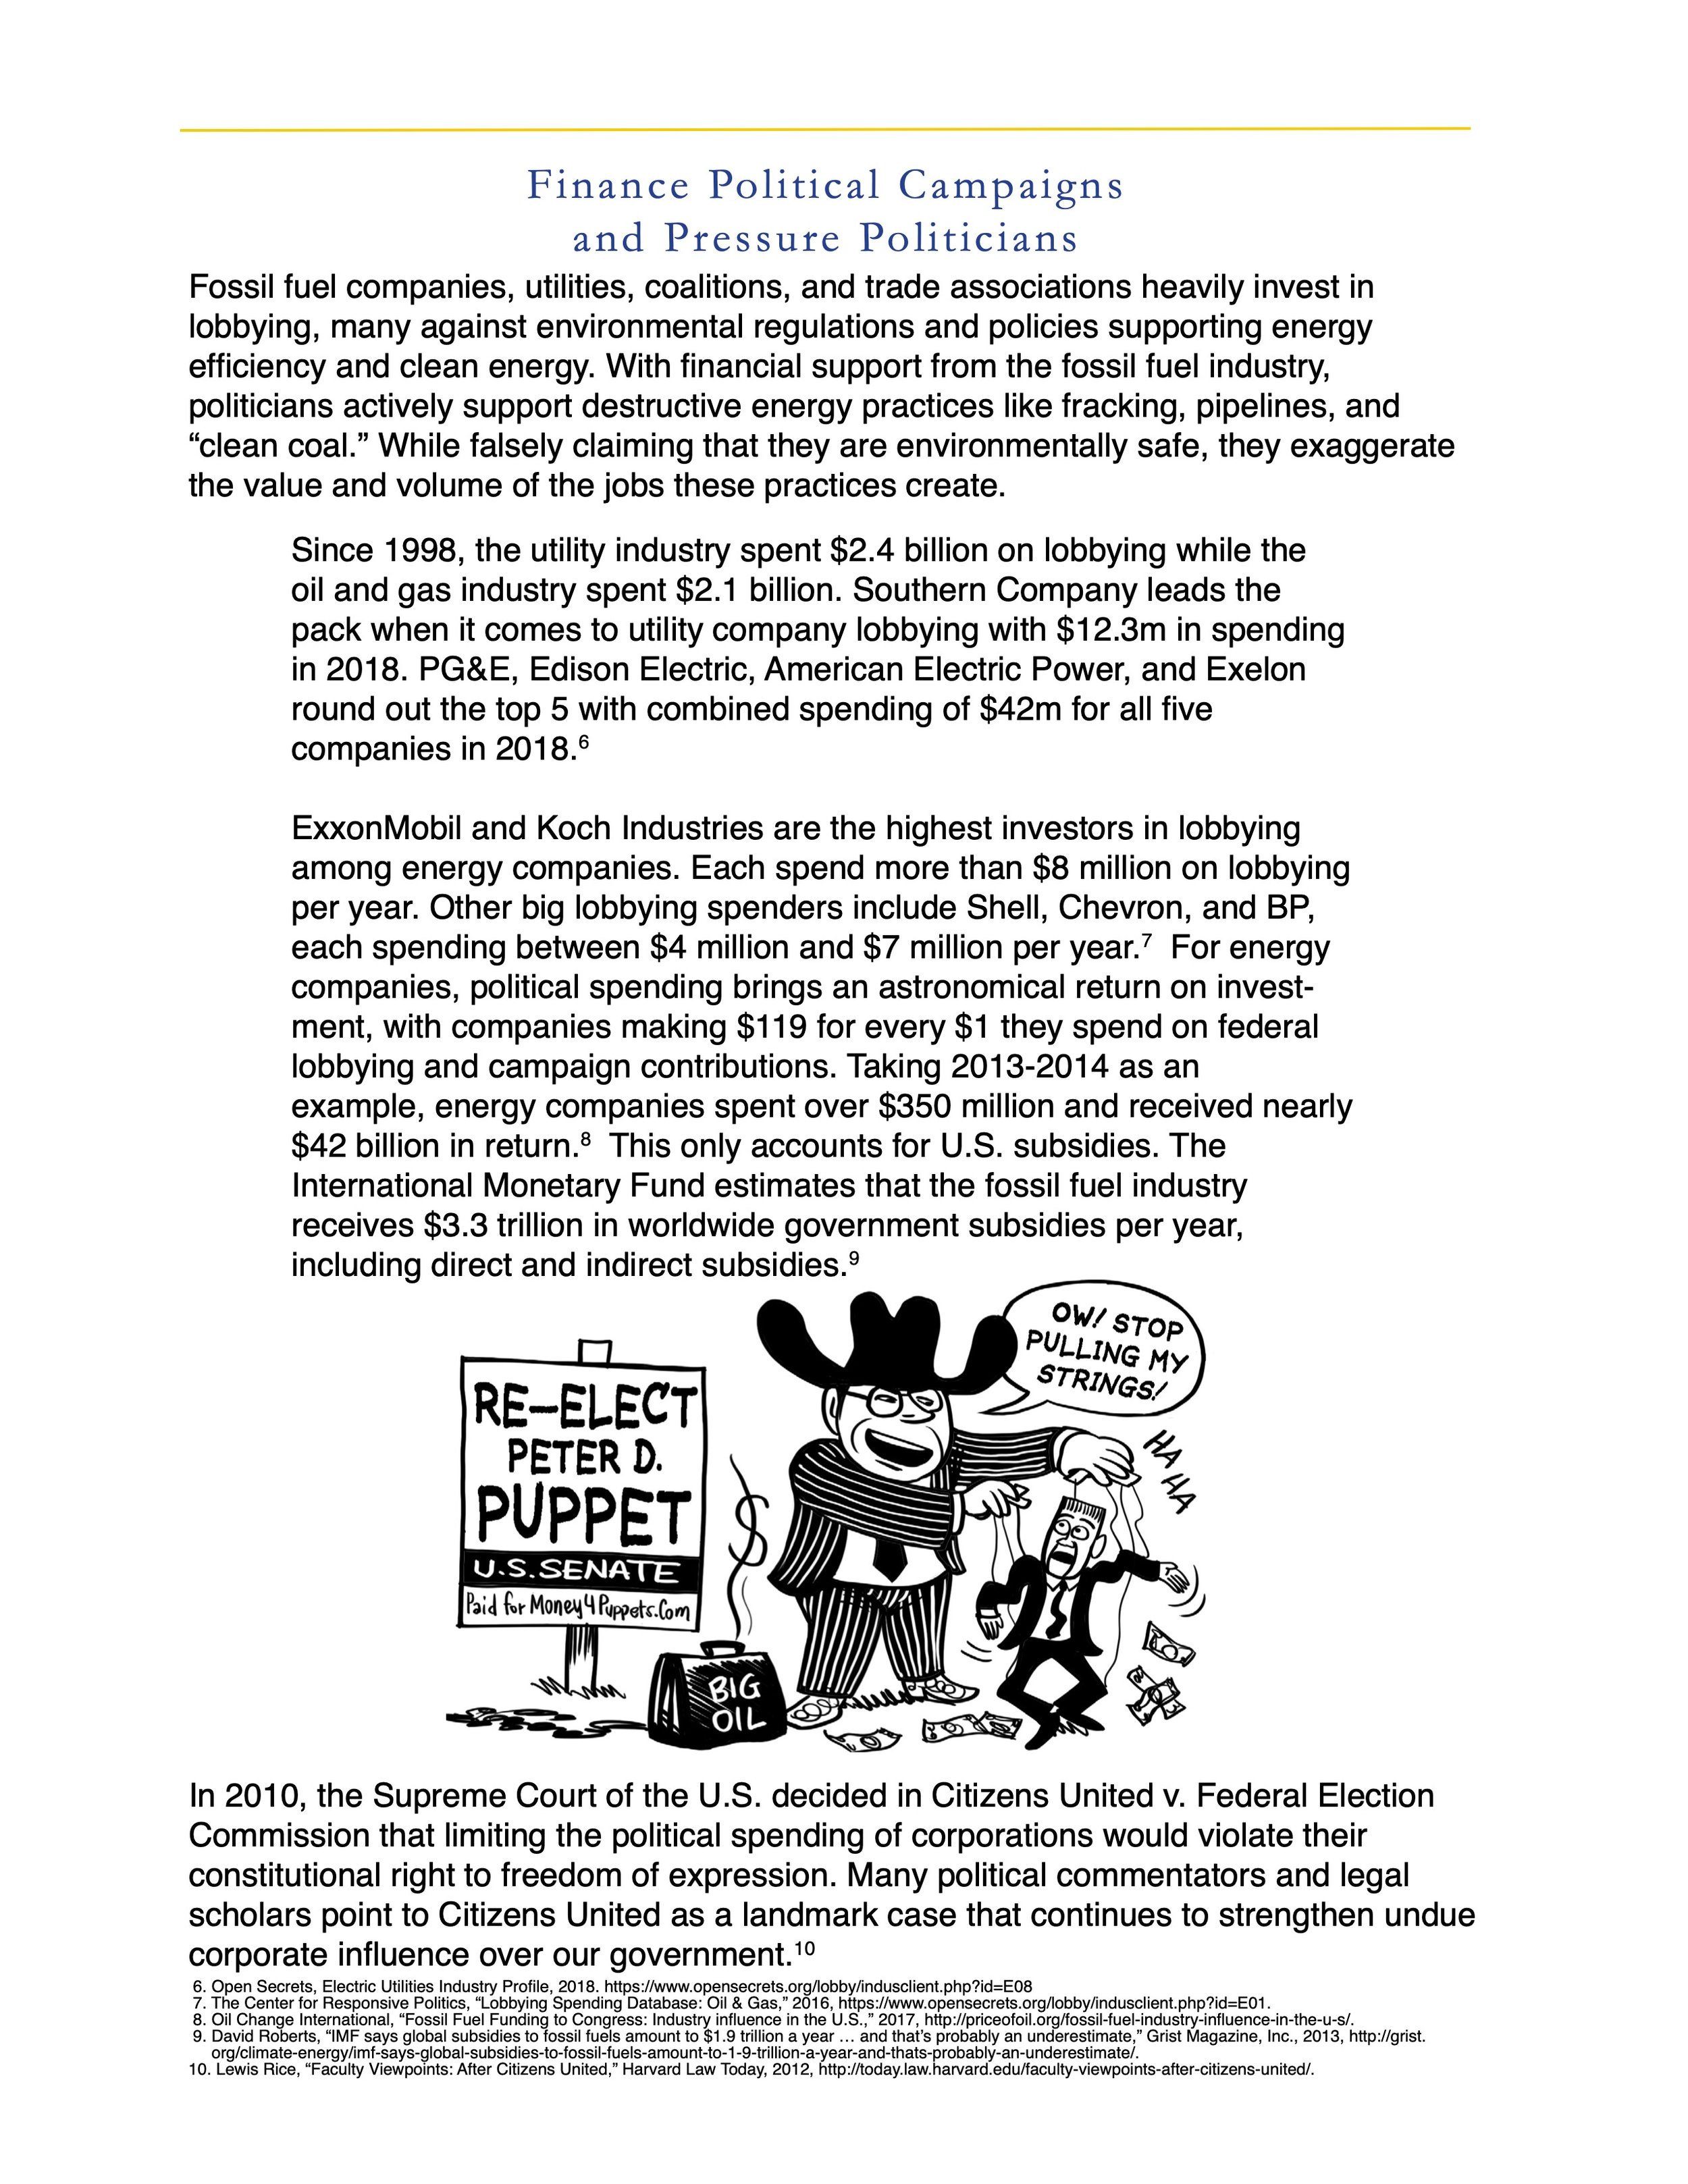 Fossil-Fueled-Foolery-An-Illustrated-Primer-on-the-Top-10-Manipulation-Tactics-of-the-Fossil-Fuel-Industry 6.jpeg